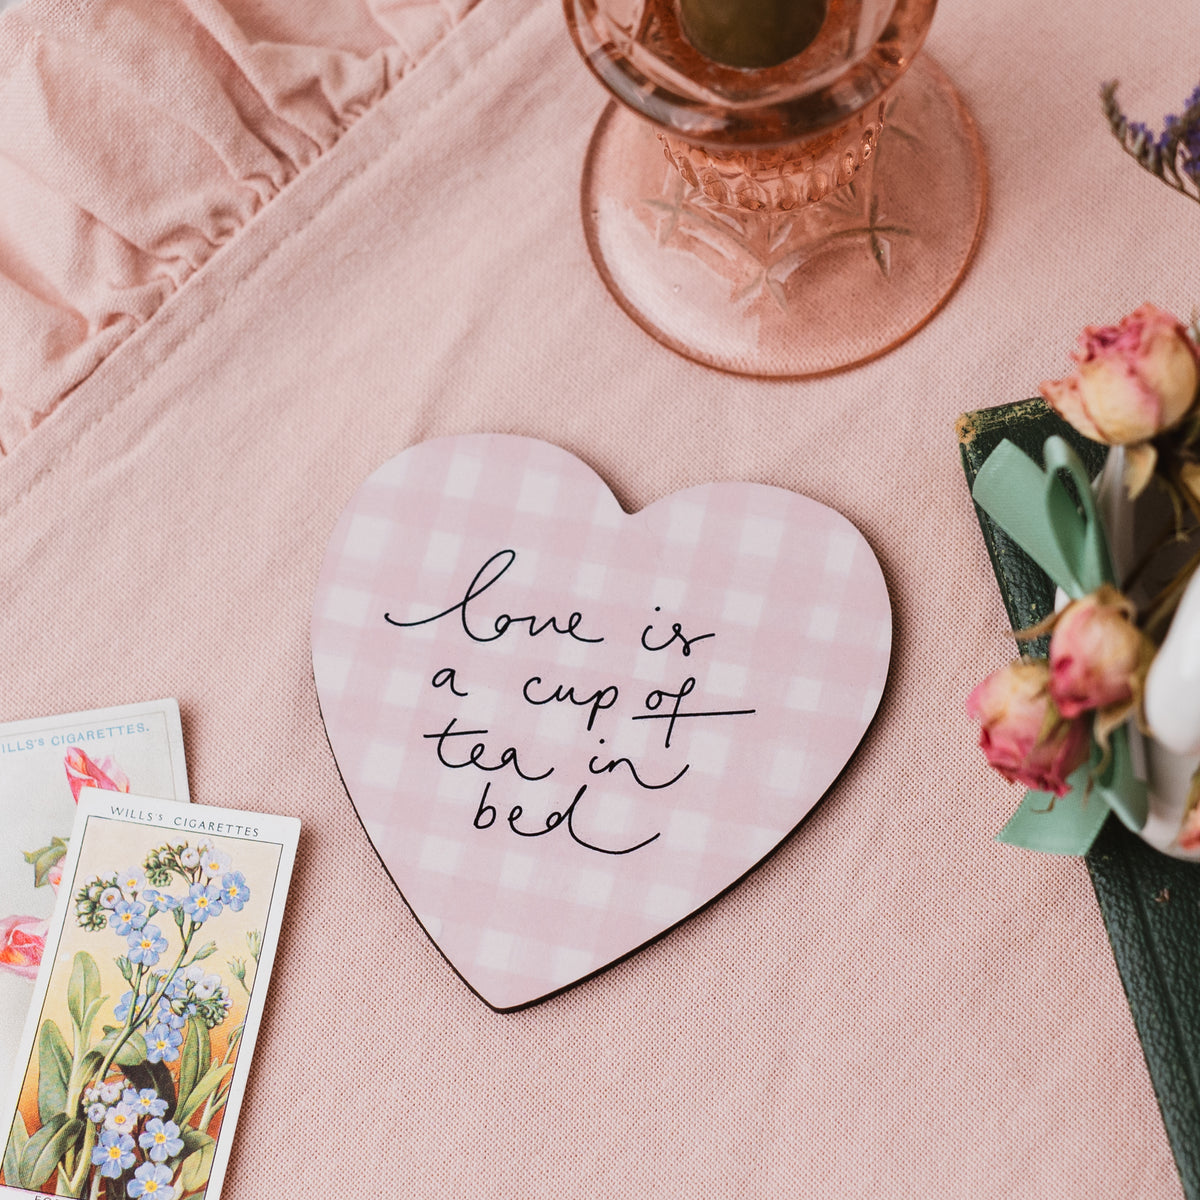 ‘Love is a cup of tea in bed’ Gingham Heart Shaped Coaster